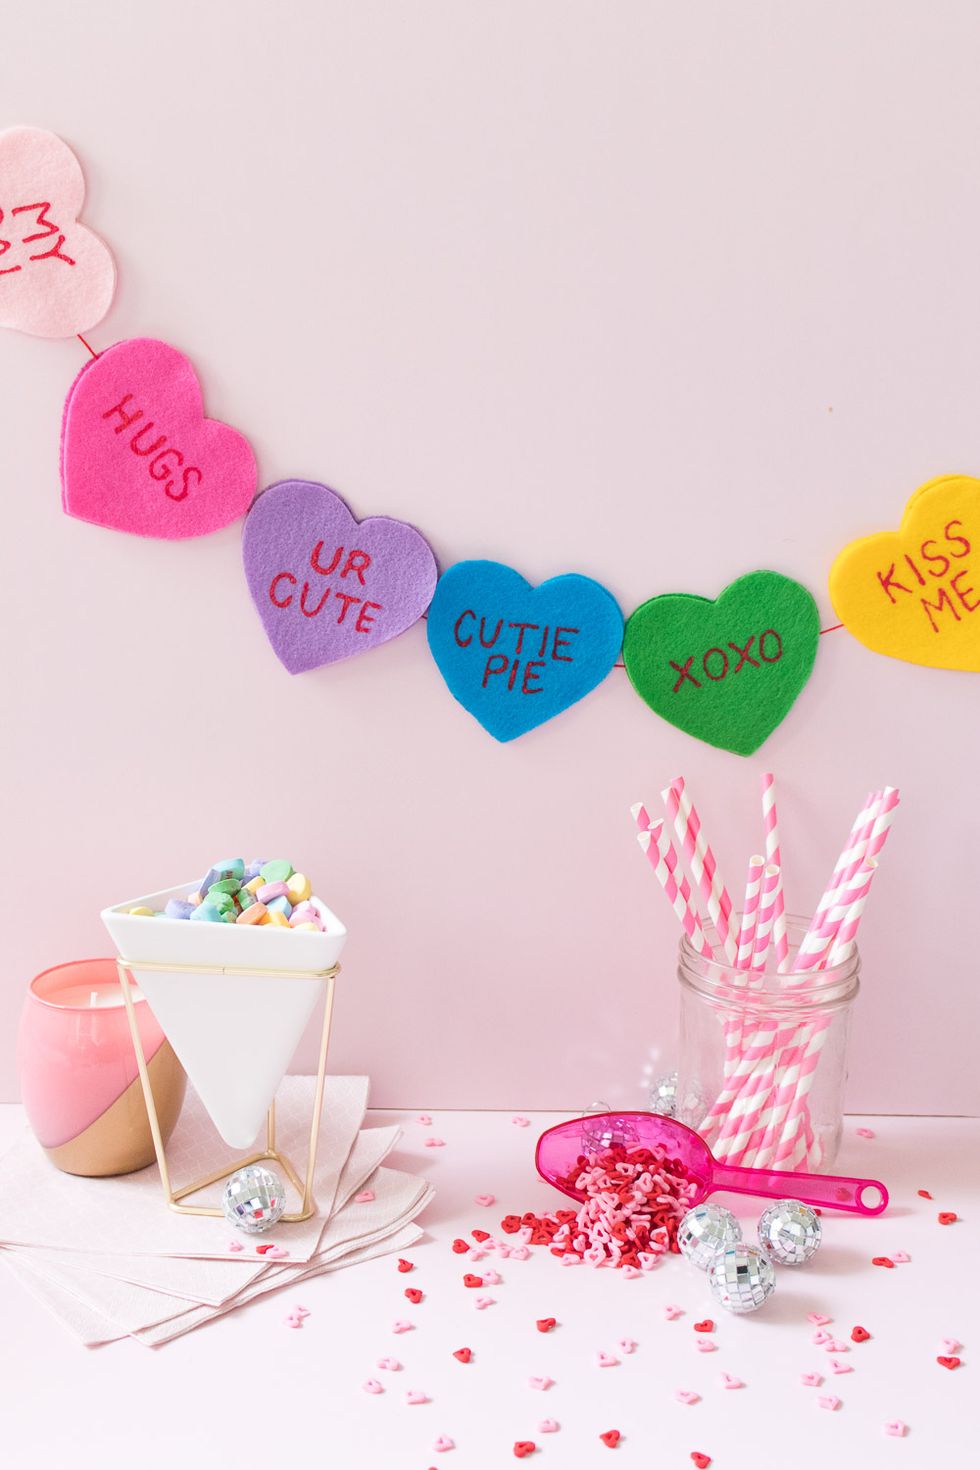 Happy Hearts Day! A Heart-Filled Kids Valentines Party - Design Improvised